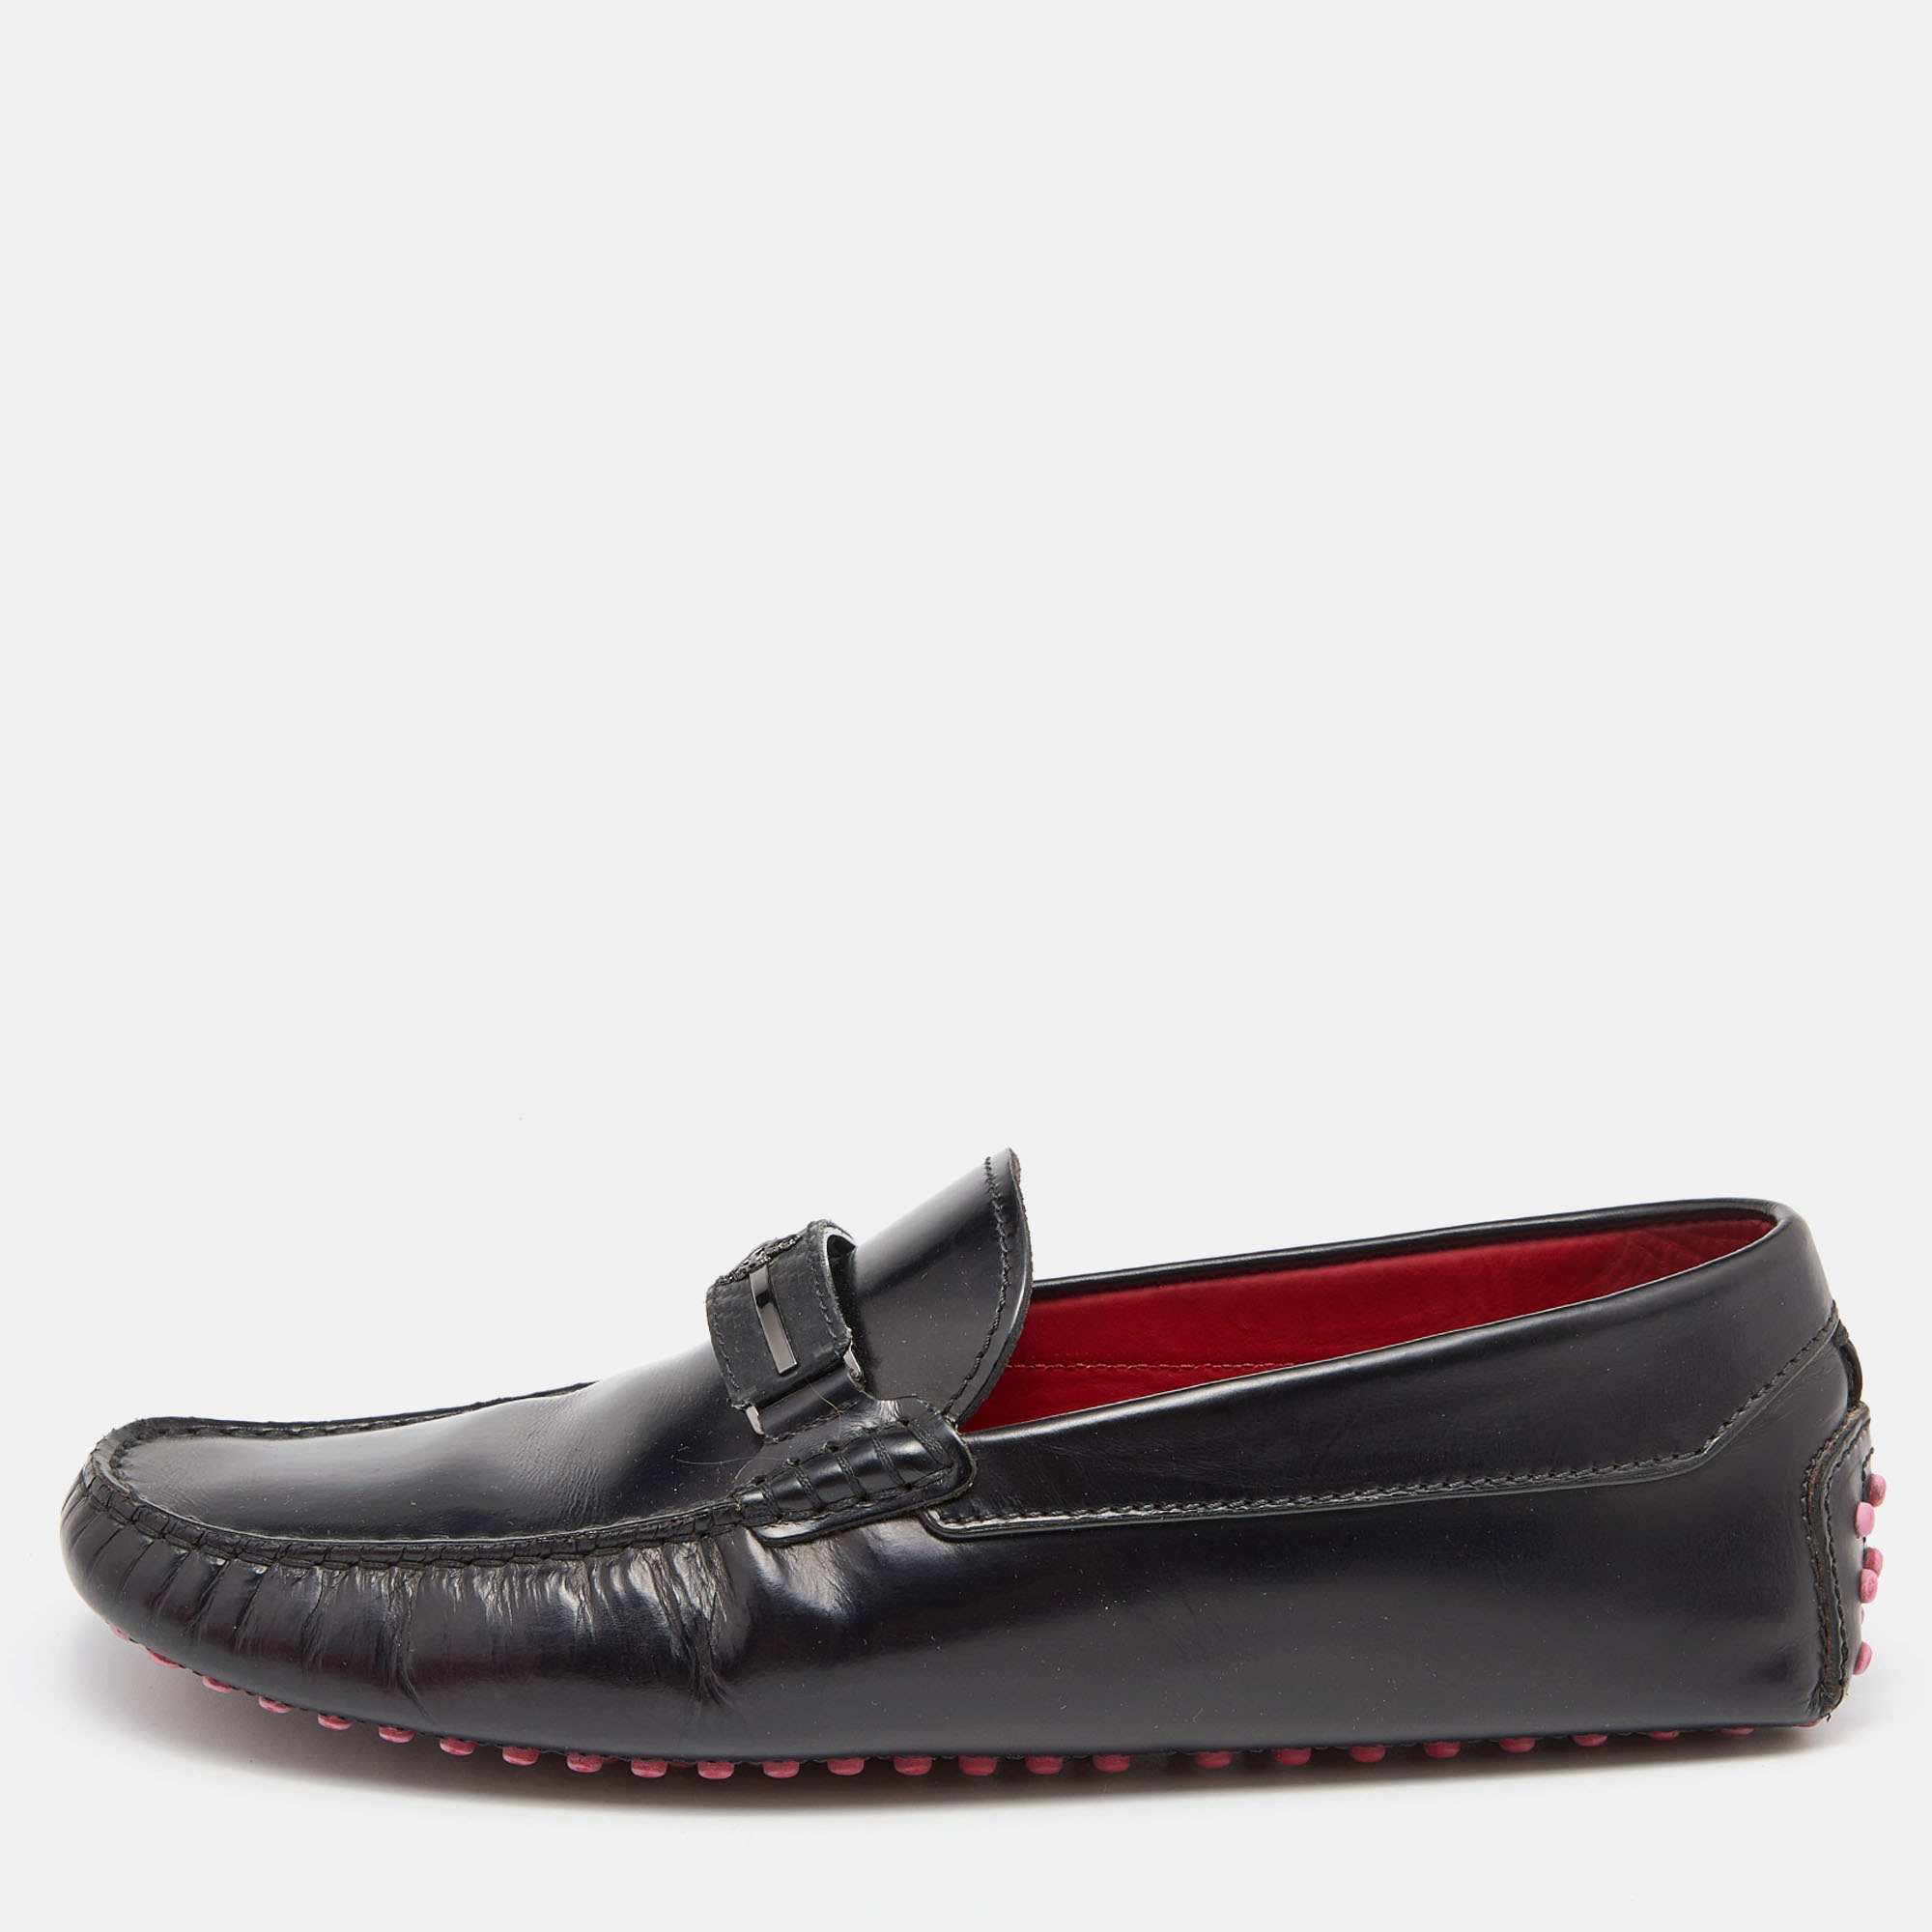 

Tod's For Ferrari Black Leather Slip On Loafers Size 41.5